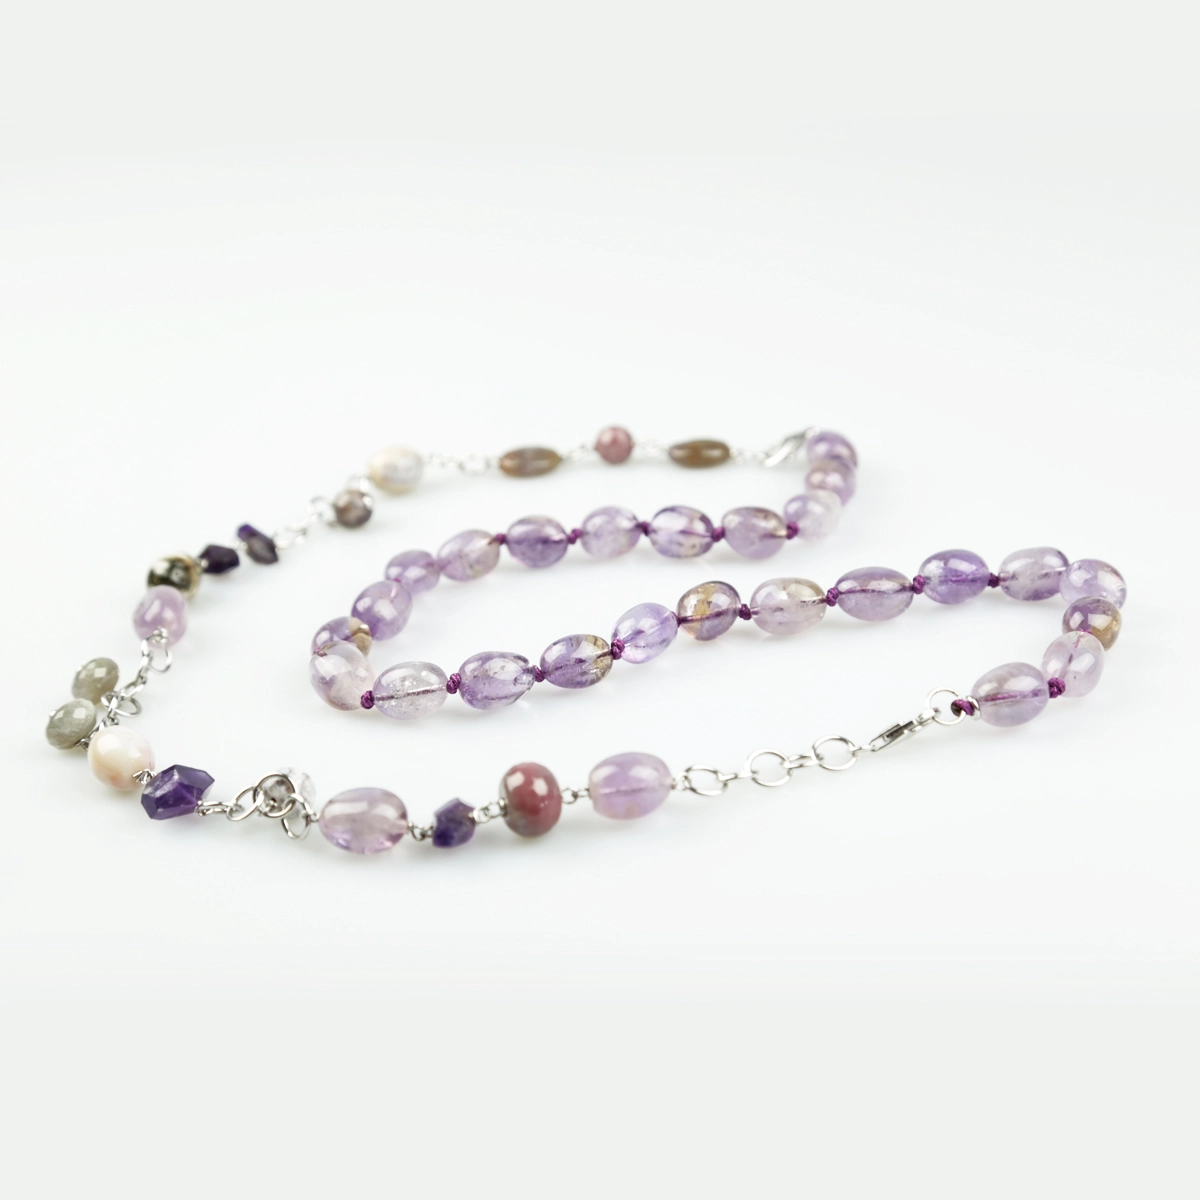 NECKLACE HALF CHAIN WITH CHARMS, HALF AMETHYST KNOTTED C235 PATRICIA GARCIA